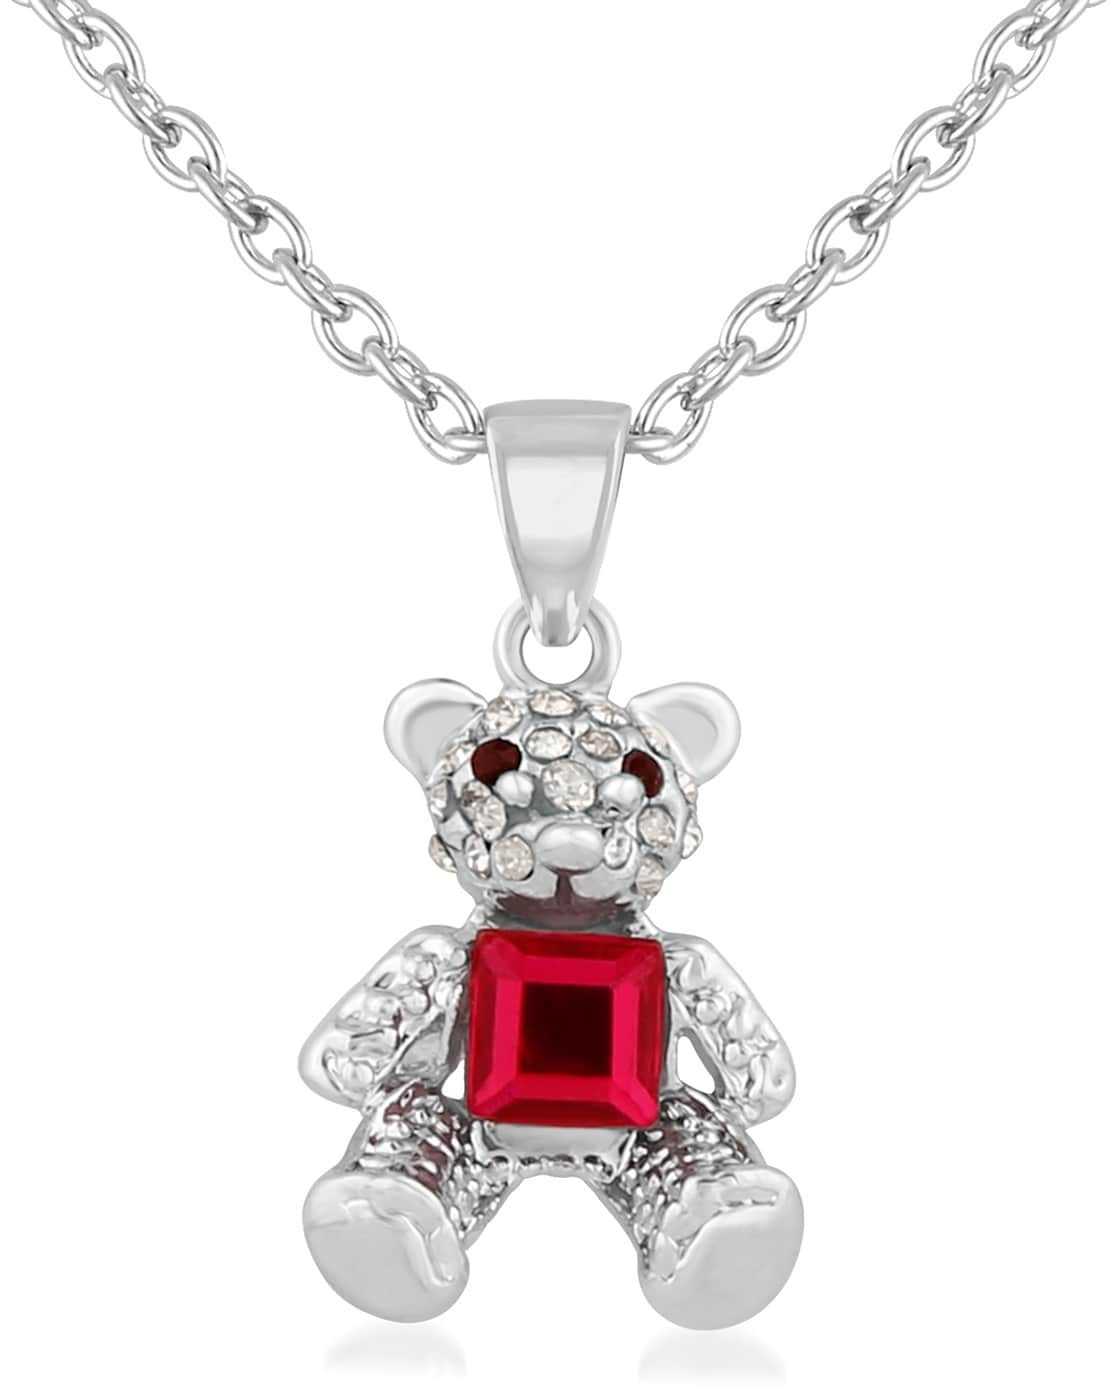 Womens Necklace, Bear Necklace, Cute Teddy Bear Pendant Necklace, Diamond  Bear : Amazon.ca: Clothing, Shoes & Accessories